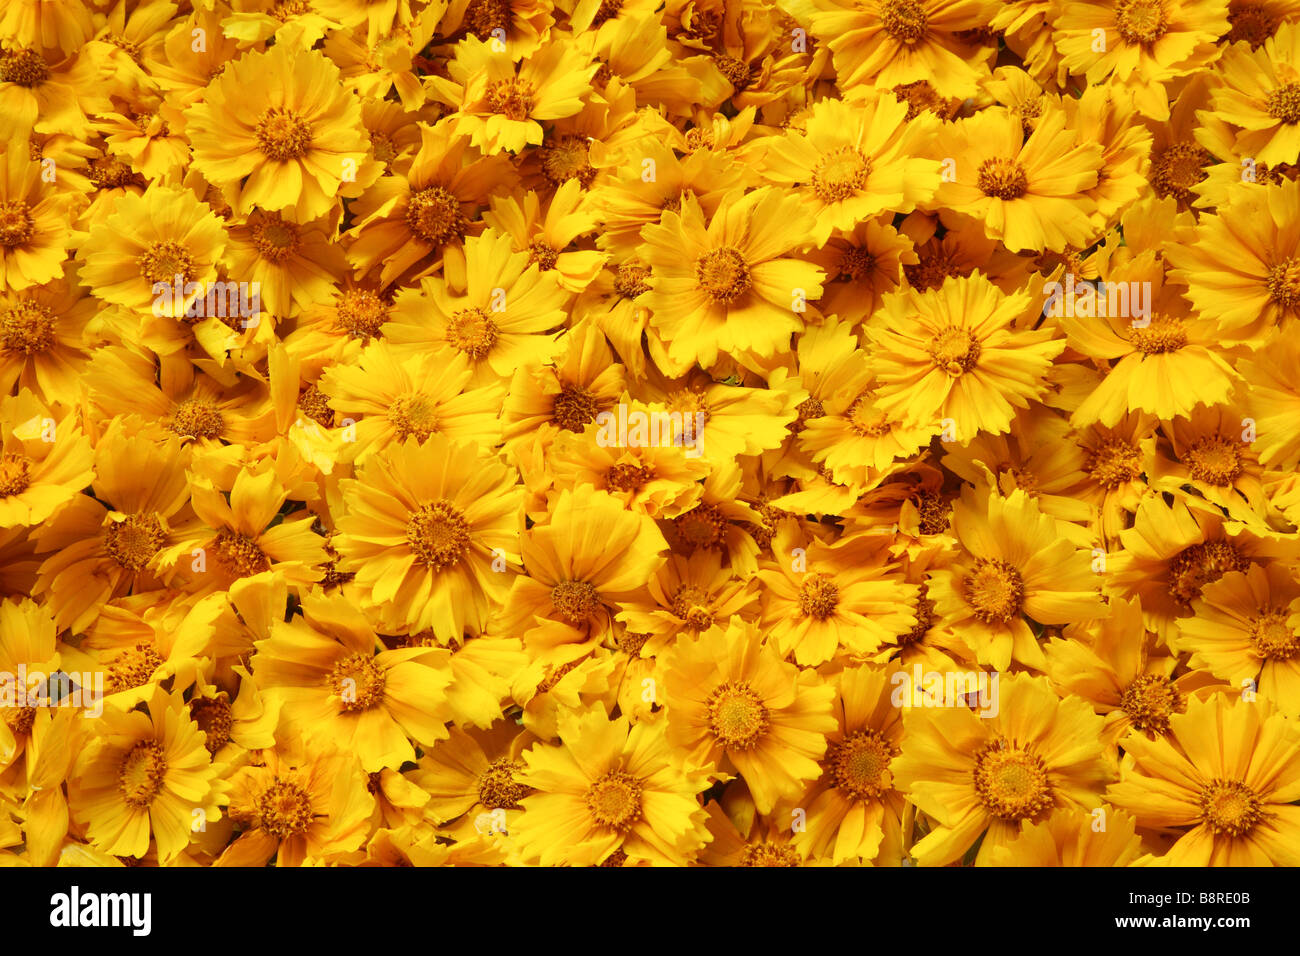 Mass of yellow tickseed Coreopsis flowers fill frame. Stock Photo